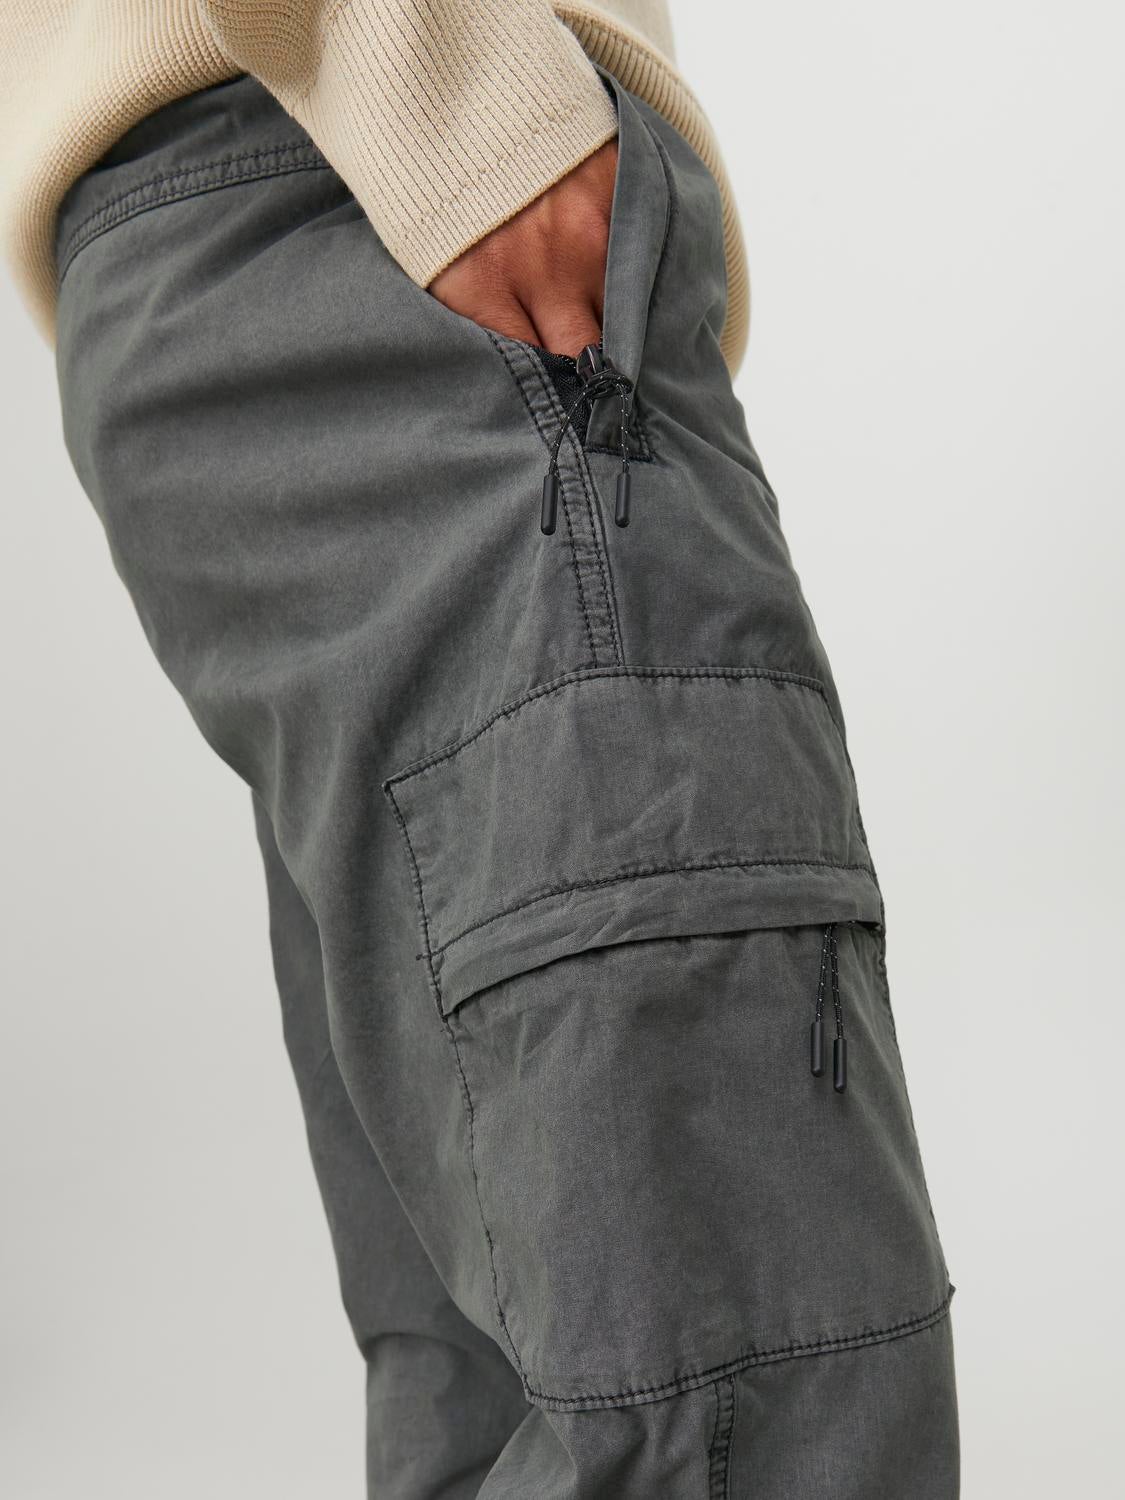 Textured Gray Suit Pants by SuitShop | Birdy Grey